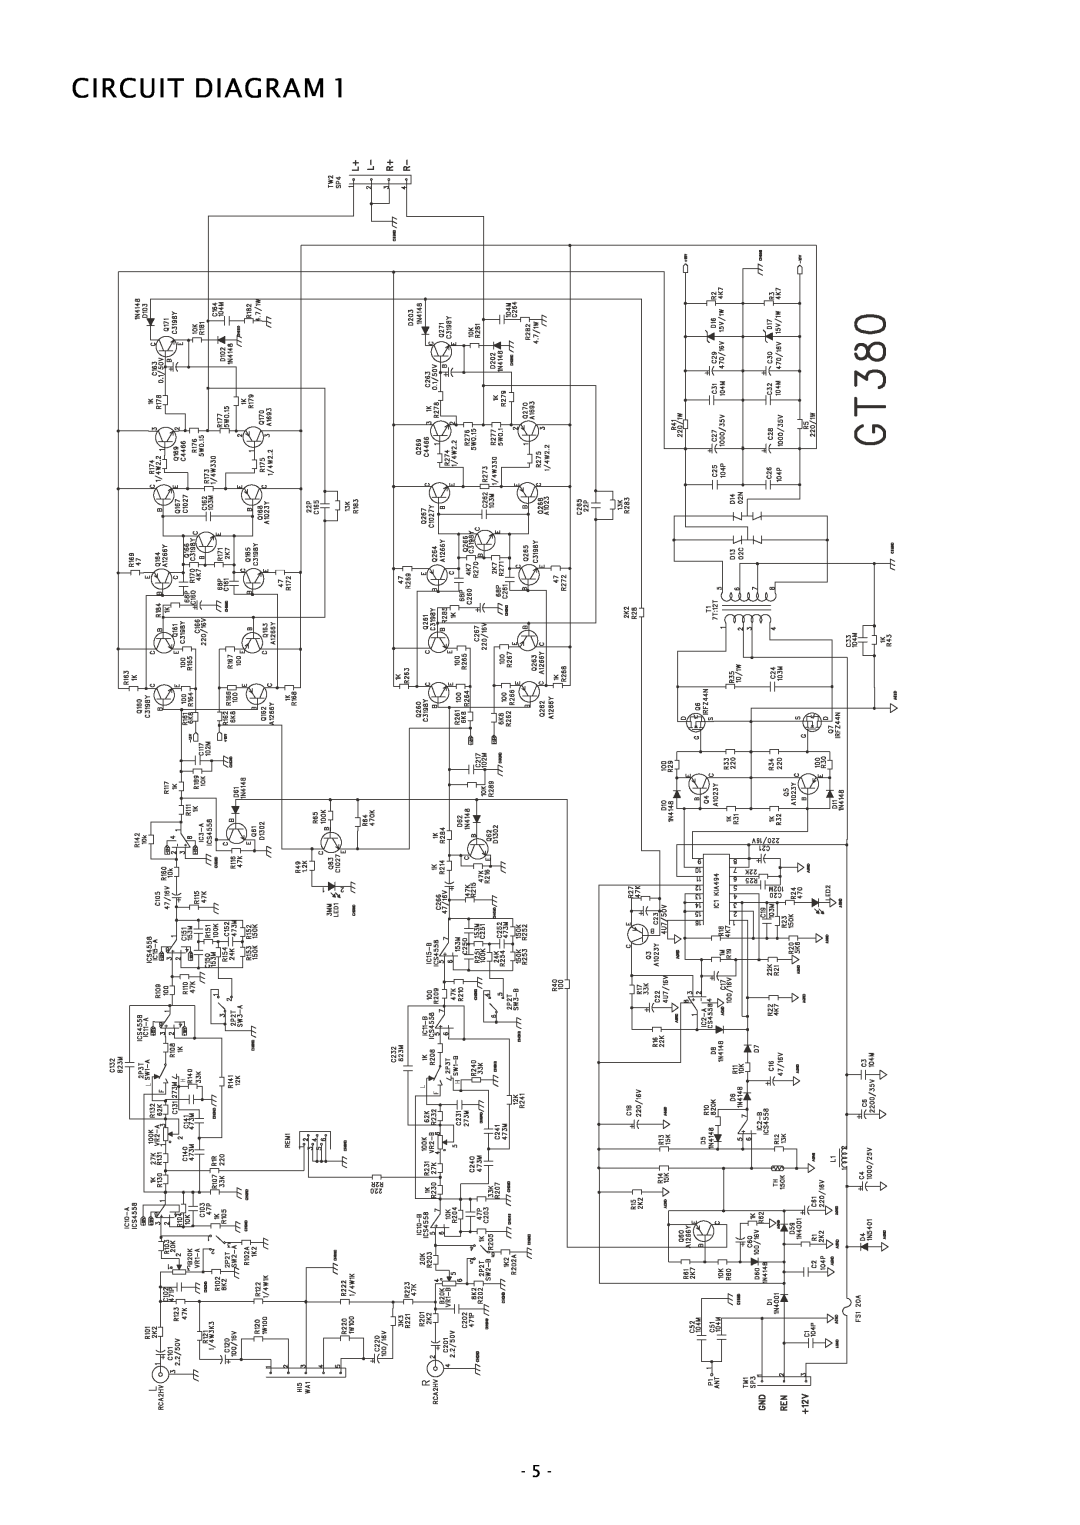 Boss Audio Systems GT380 service manual Circuit Diagram 